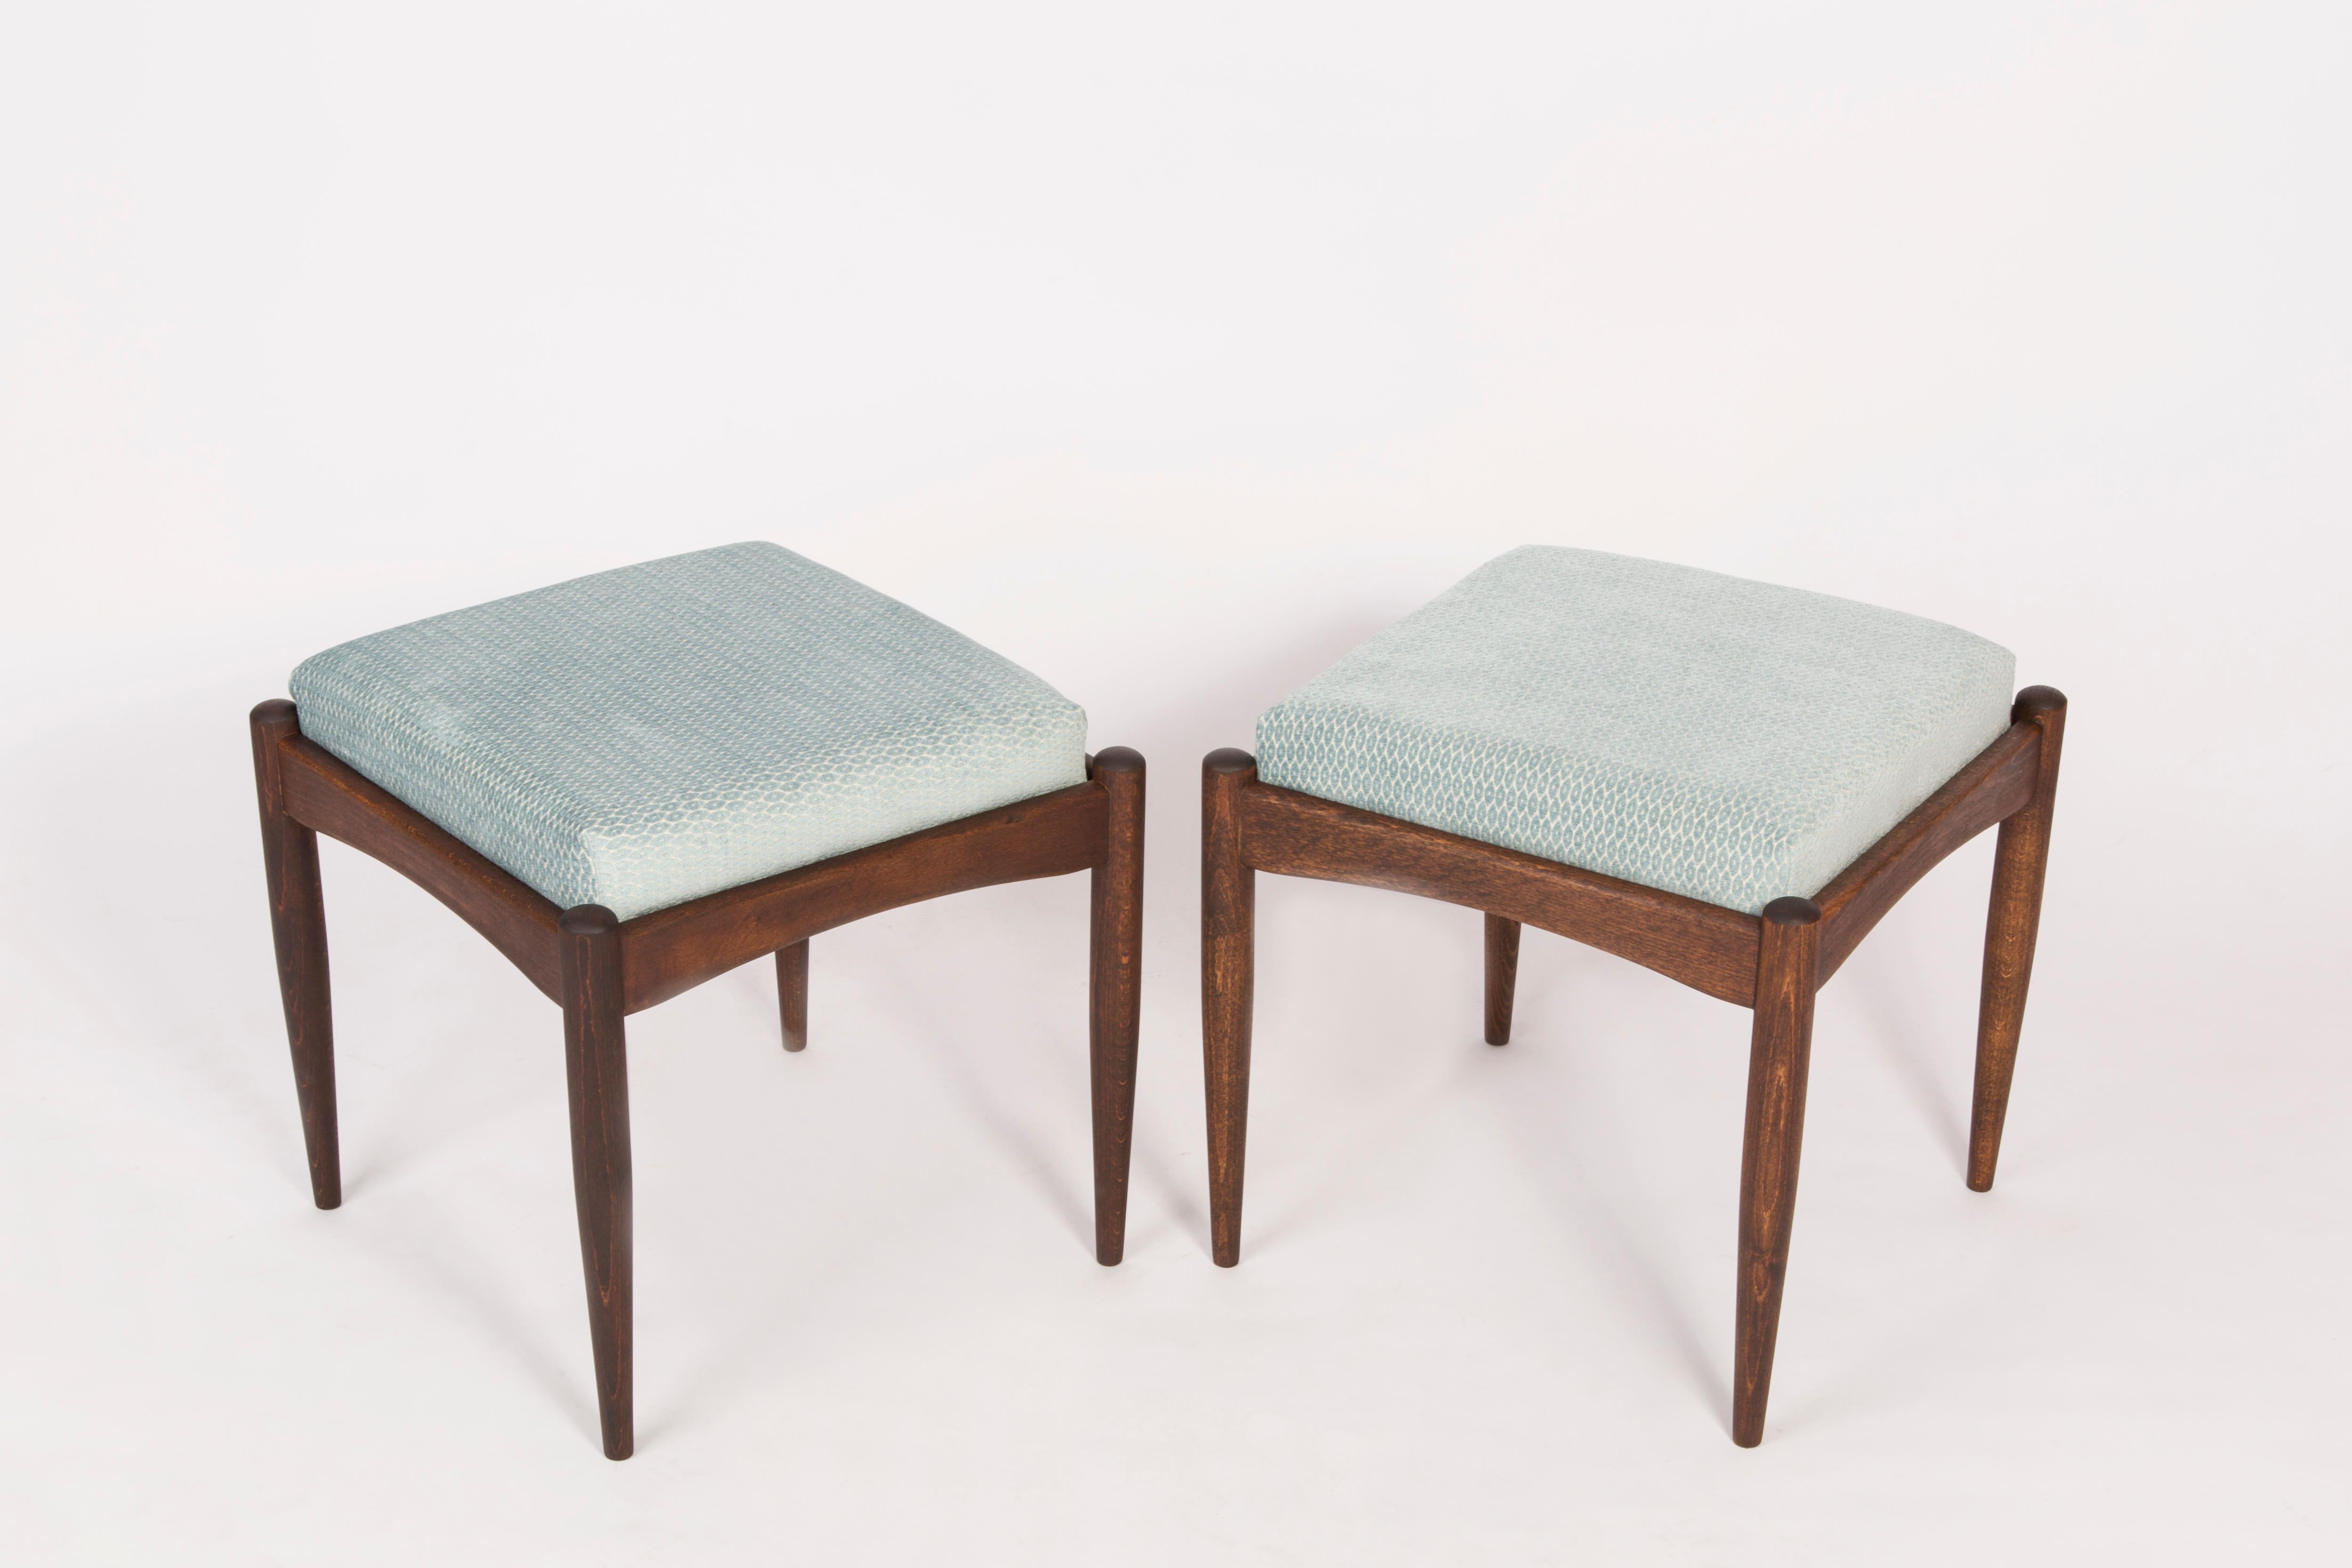 Set of Two Midcentury Blue Velvet Armchairs with Stools, Zenon Baczyk, 1960s For Sale 7